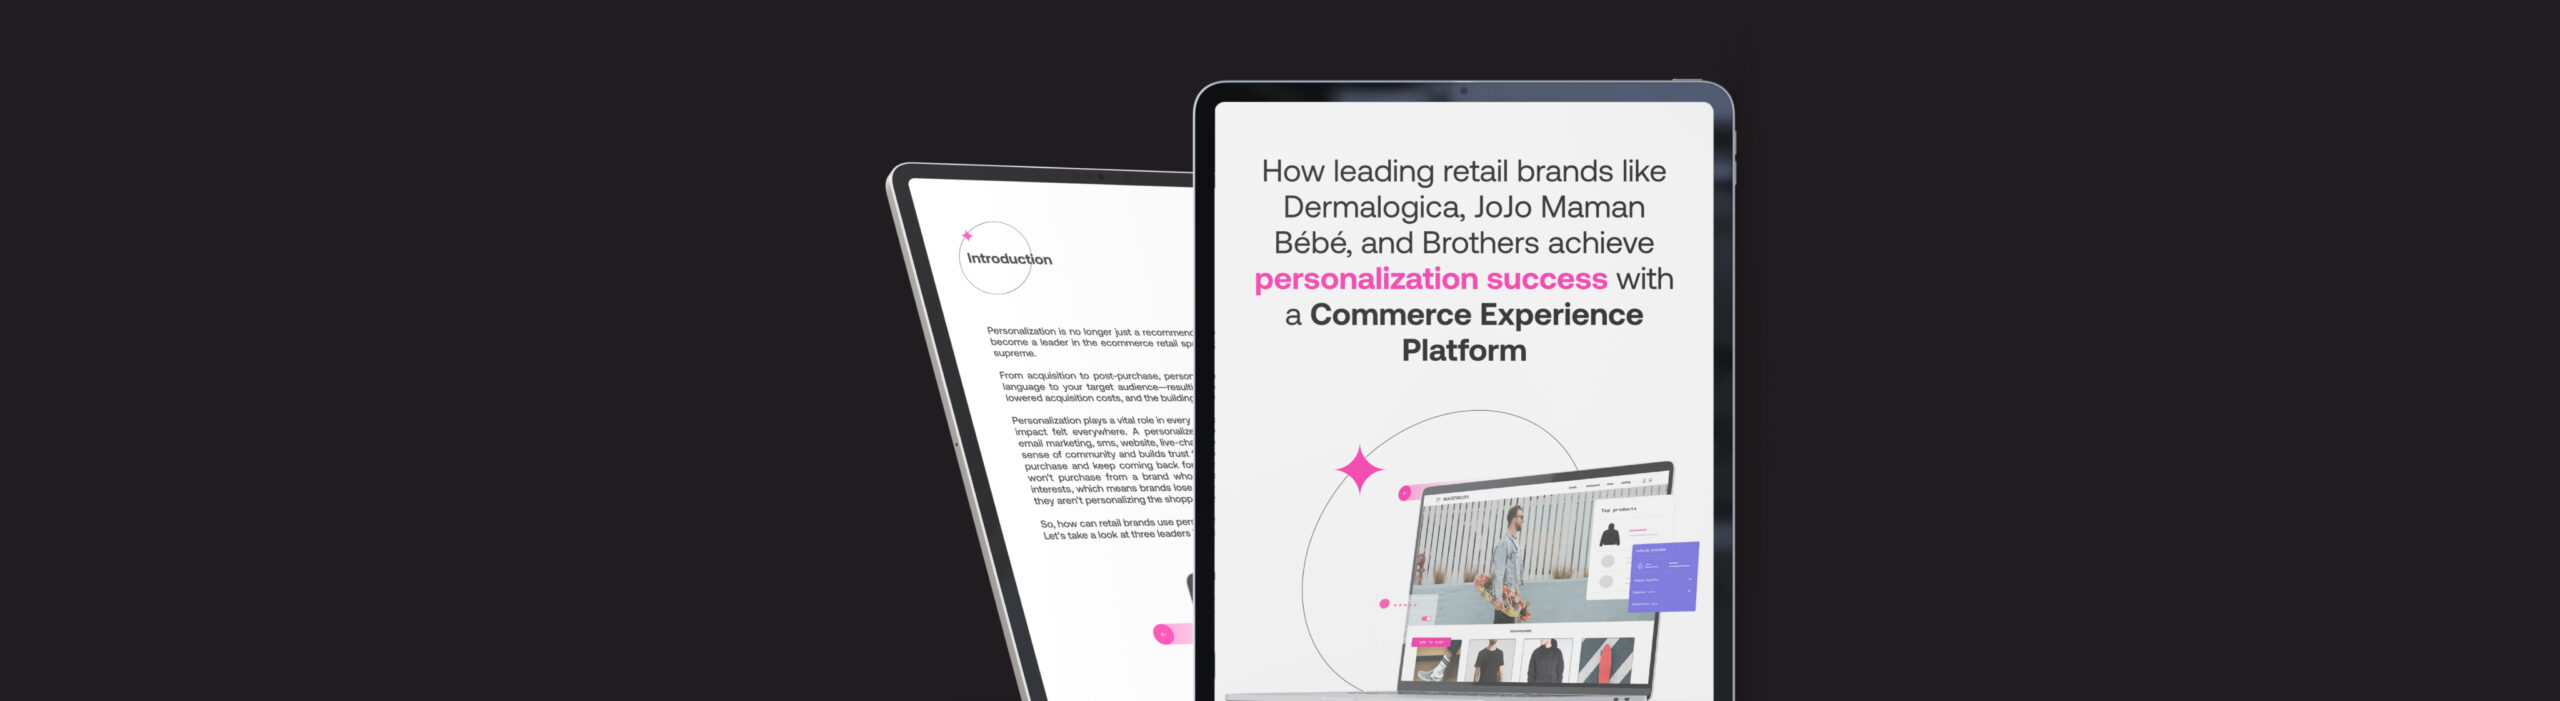 How leading retail brands like Dermalogica, JoJo Maman Bébé, and Brothers achieve personalization success with a Commerce Experience Platform